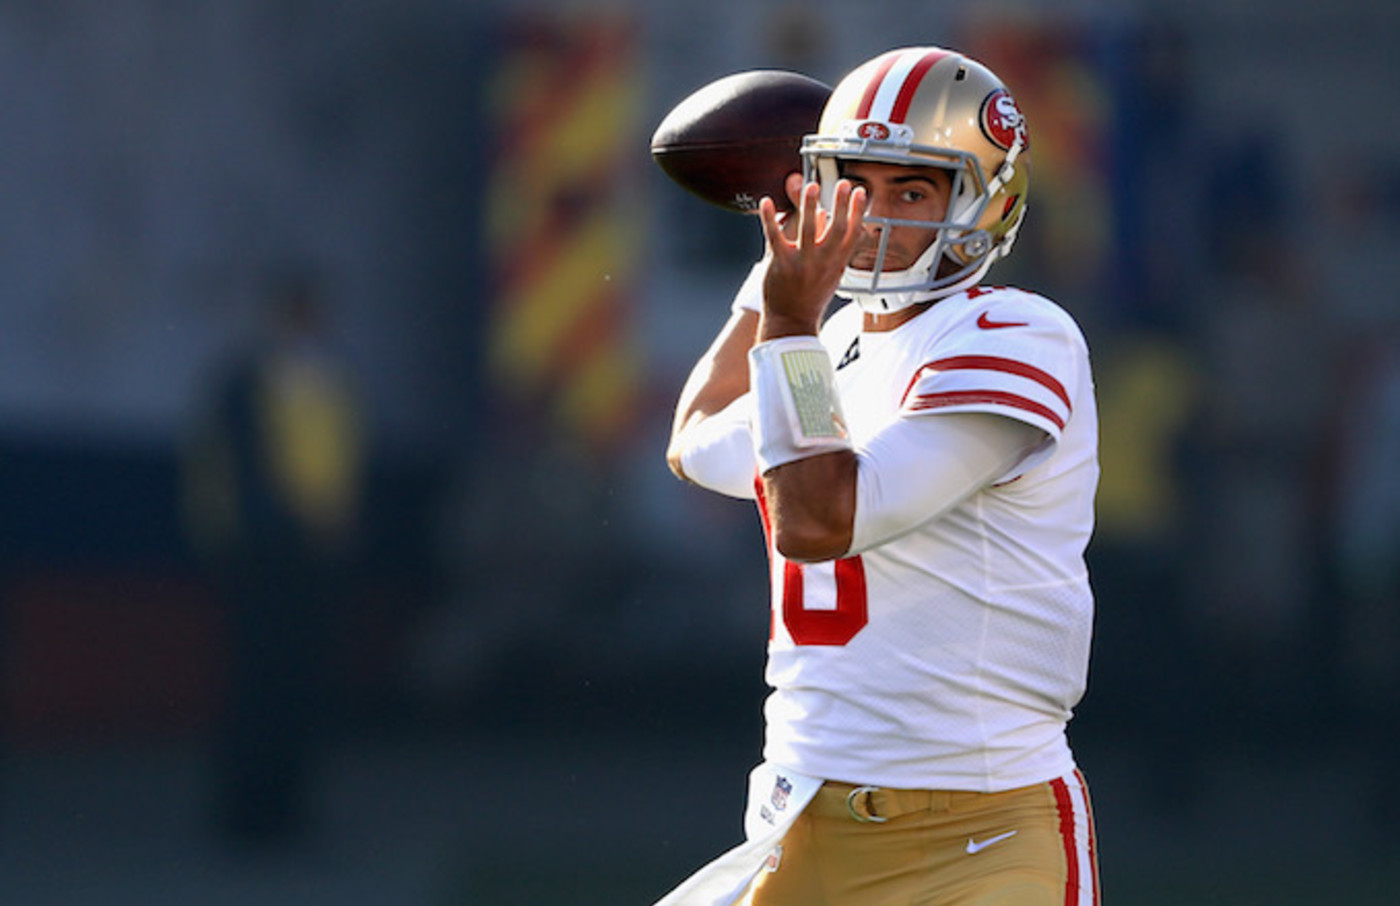 NFL Fans Stunned as 49ers QB Jimmy Garoppolo Signs Biggest Contract in